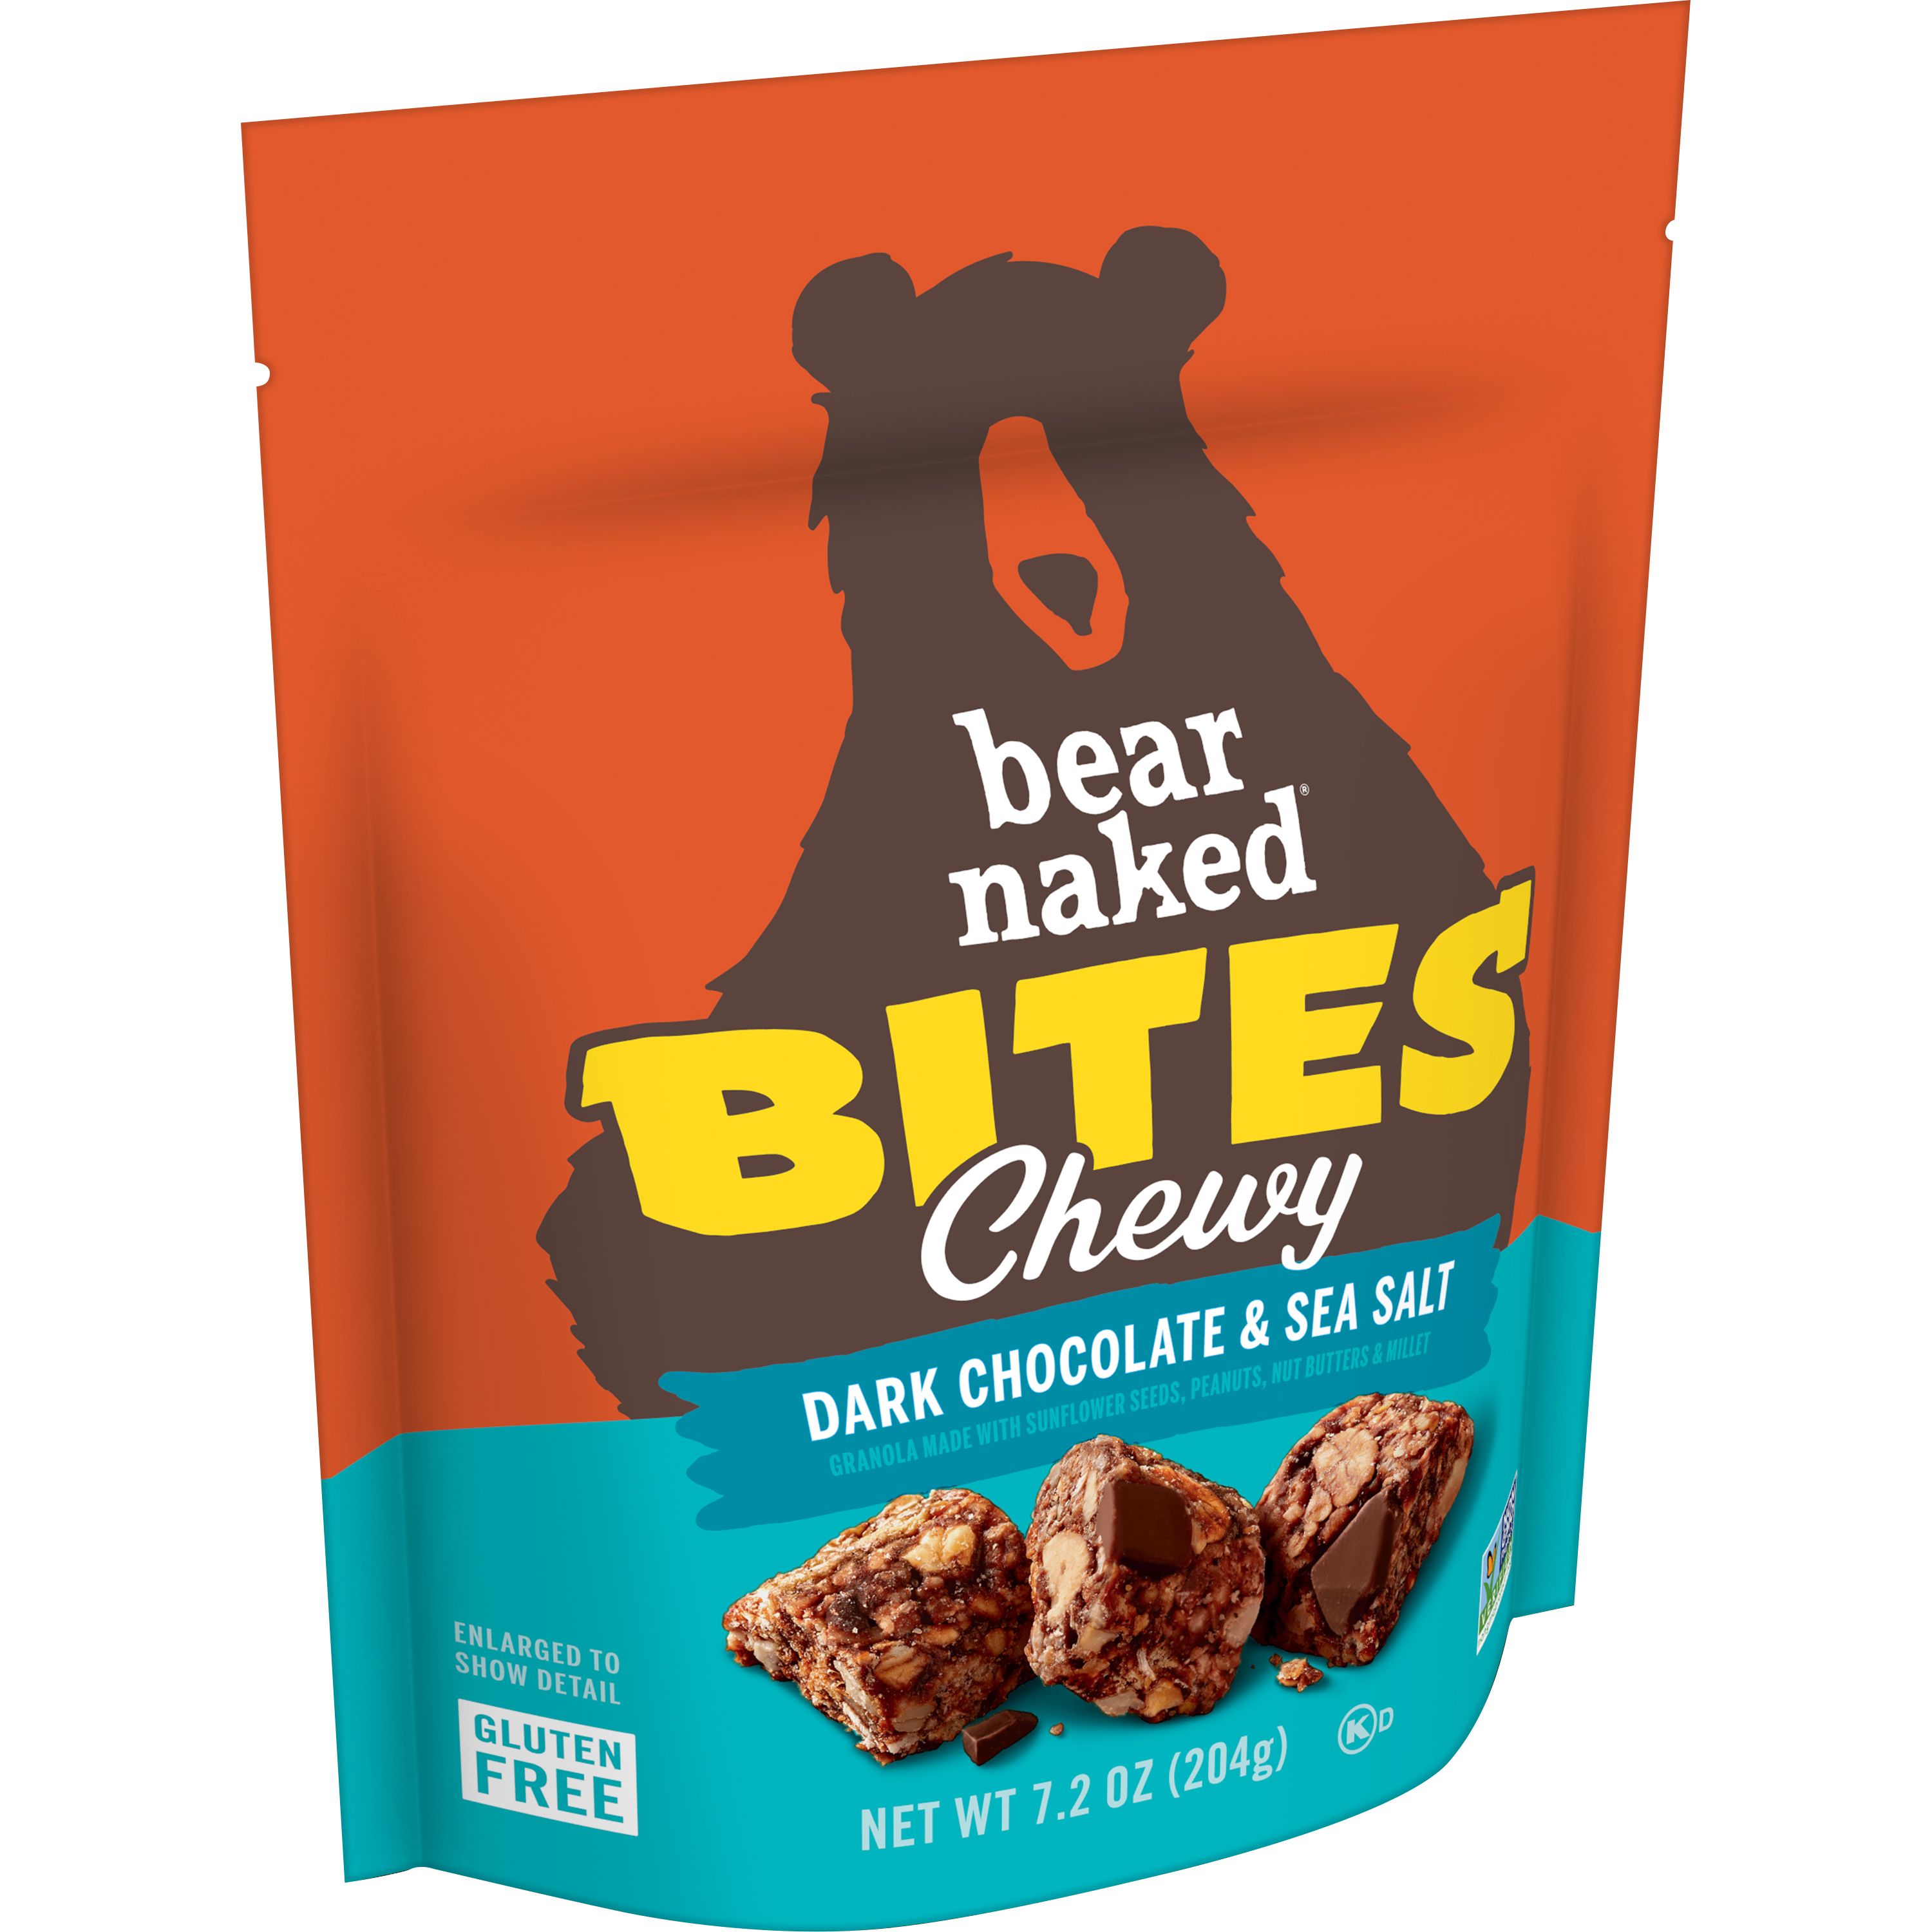 Bear naked bites chewy